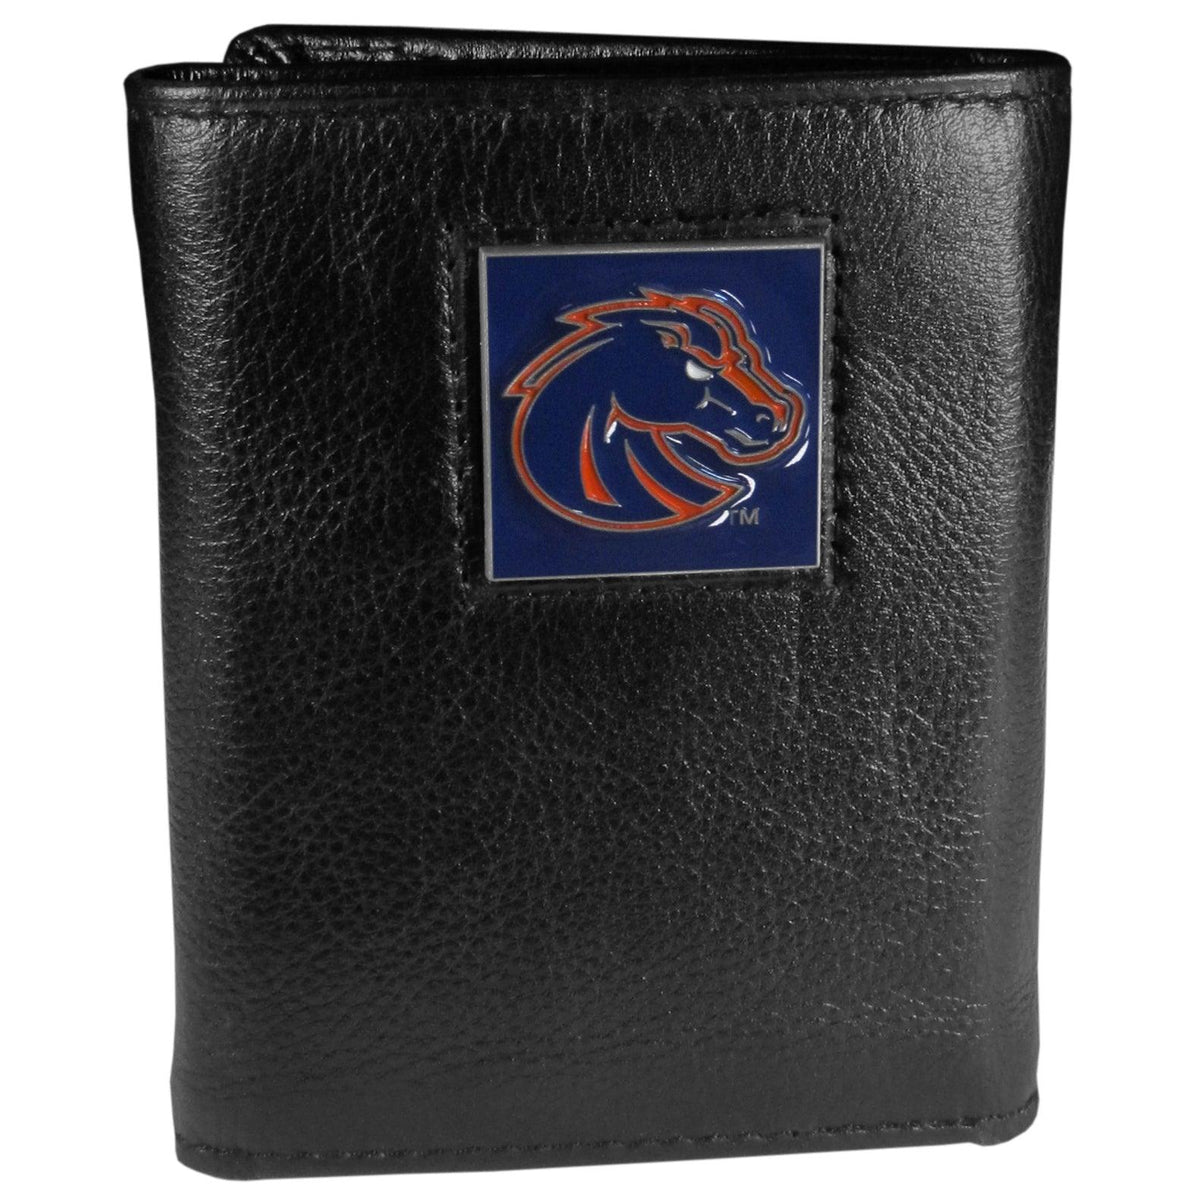 Boise St. Broncos Deluxe Leather Tri-fold Wallet Packaged in Gift Box - Flyclothing LLC